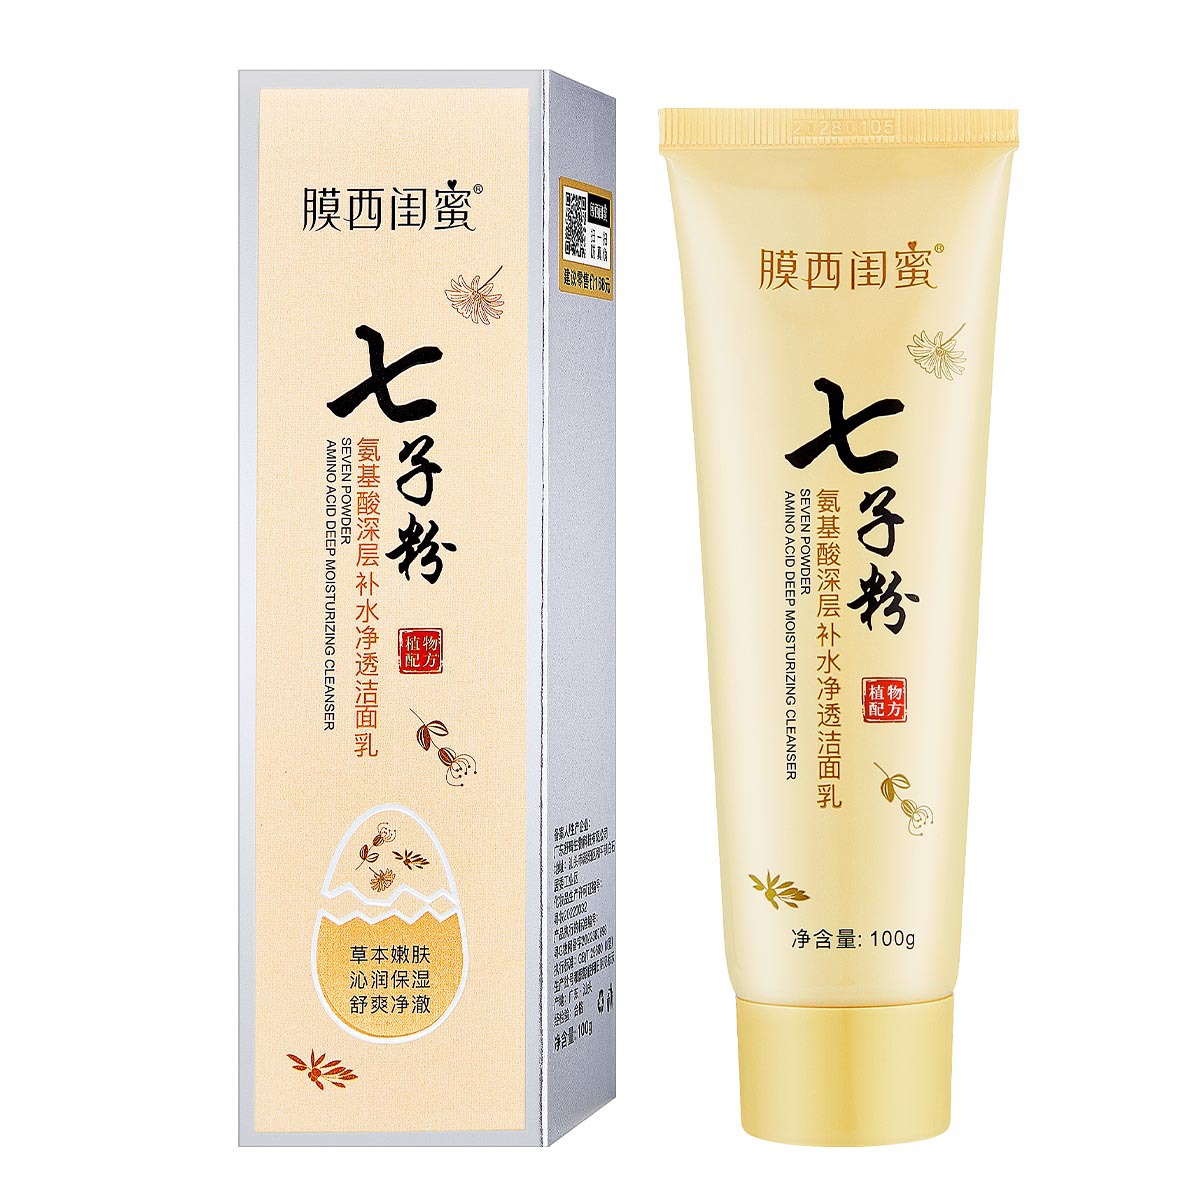 Tiktok Seven Seed Powder Amino Acid Deep Hydrating Clear and Translucent BrighTening Removing Blackheads Cleansing Pore Oil Control Foaming Cleanser